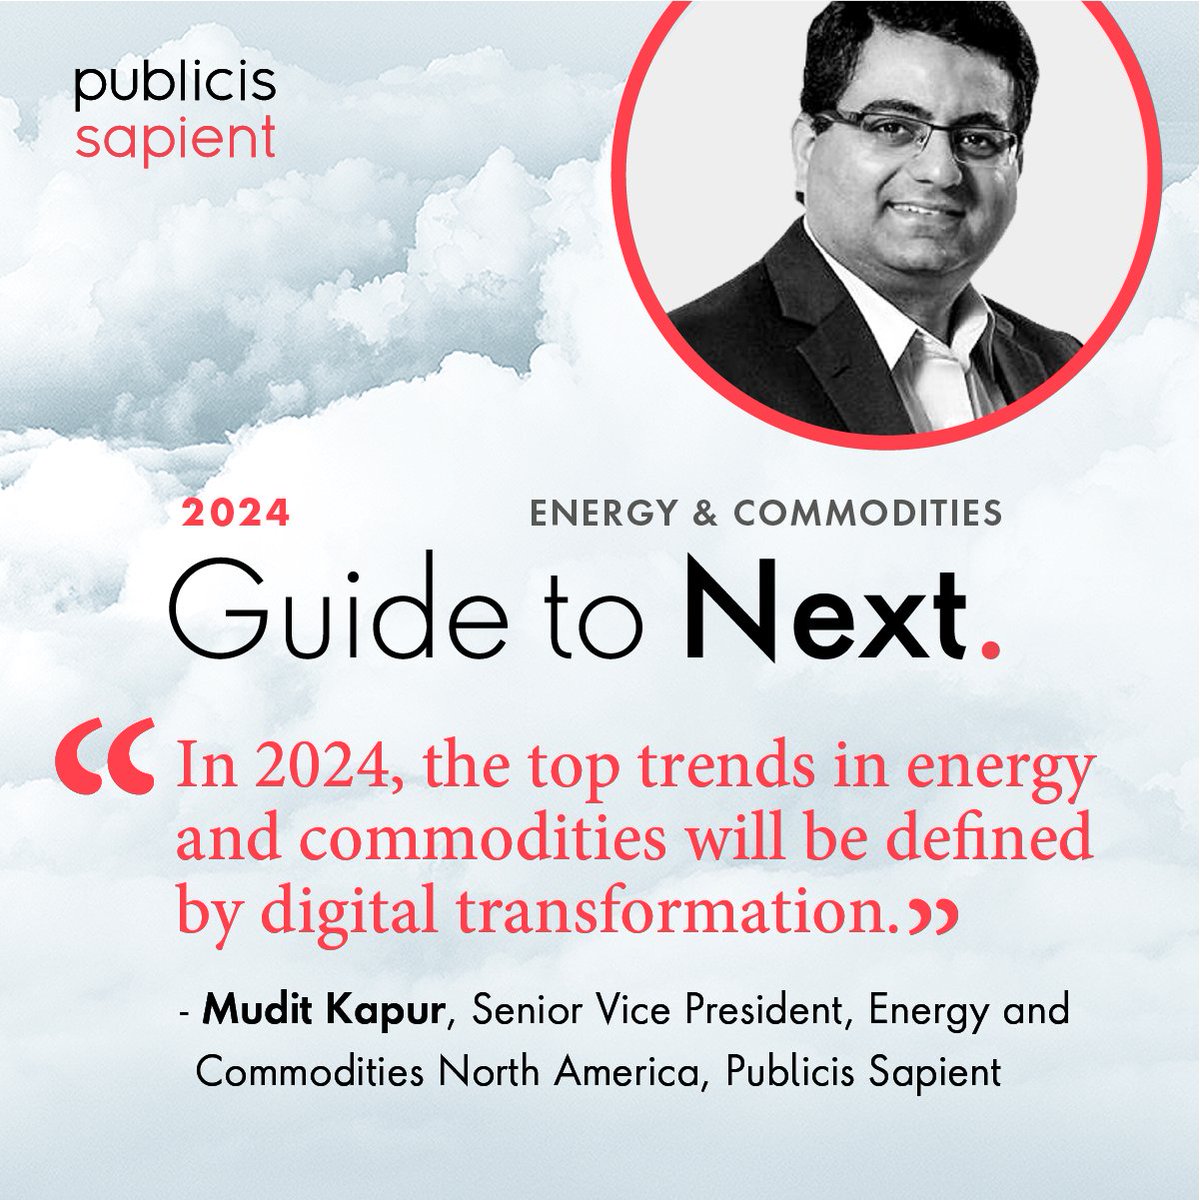 Explore our 2024 Guide to Next for the hottest trends and insights primed to help you thrive in the coming year. Here's what you need to know: bit.ly/46gpfUd #GuideToNext #BusinessStrategy #DigitalTransformation